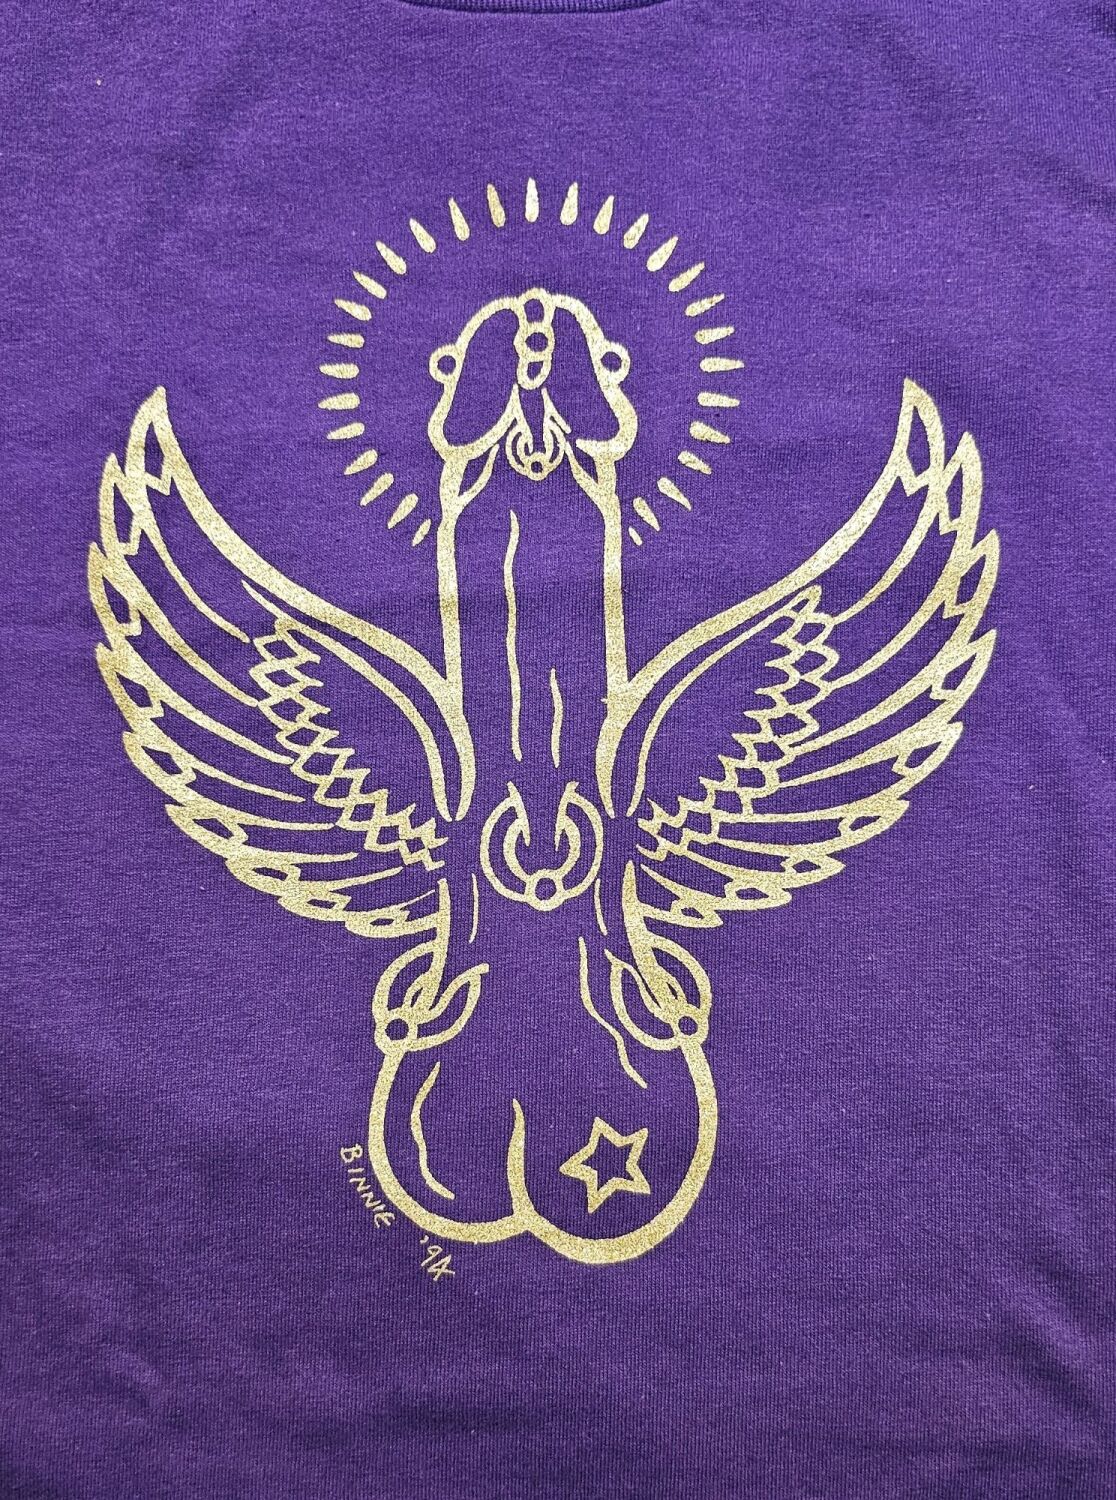 Iconic Flying cock Tee shirt  Gold on purple size M